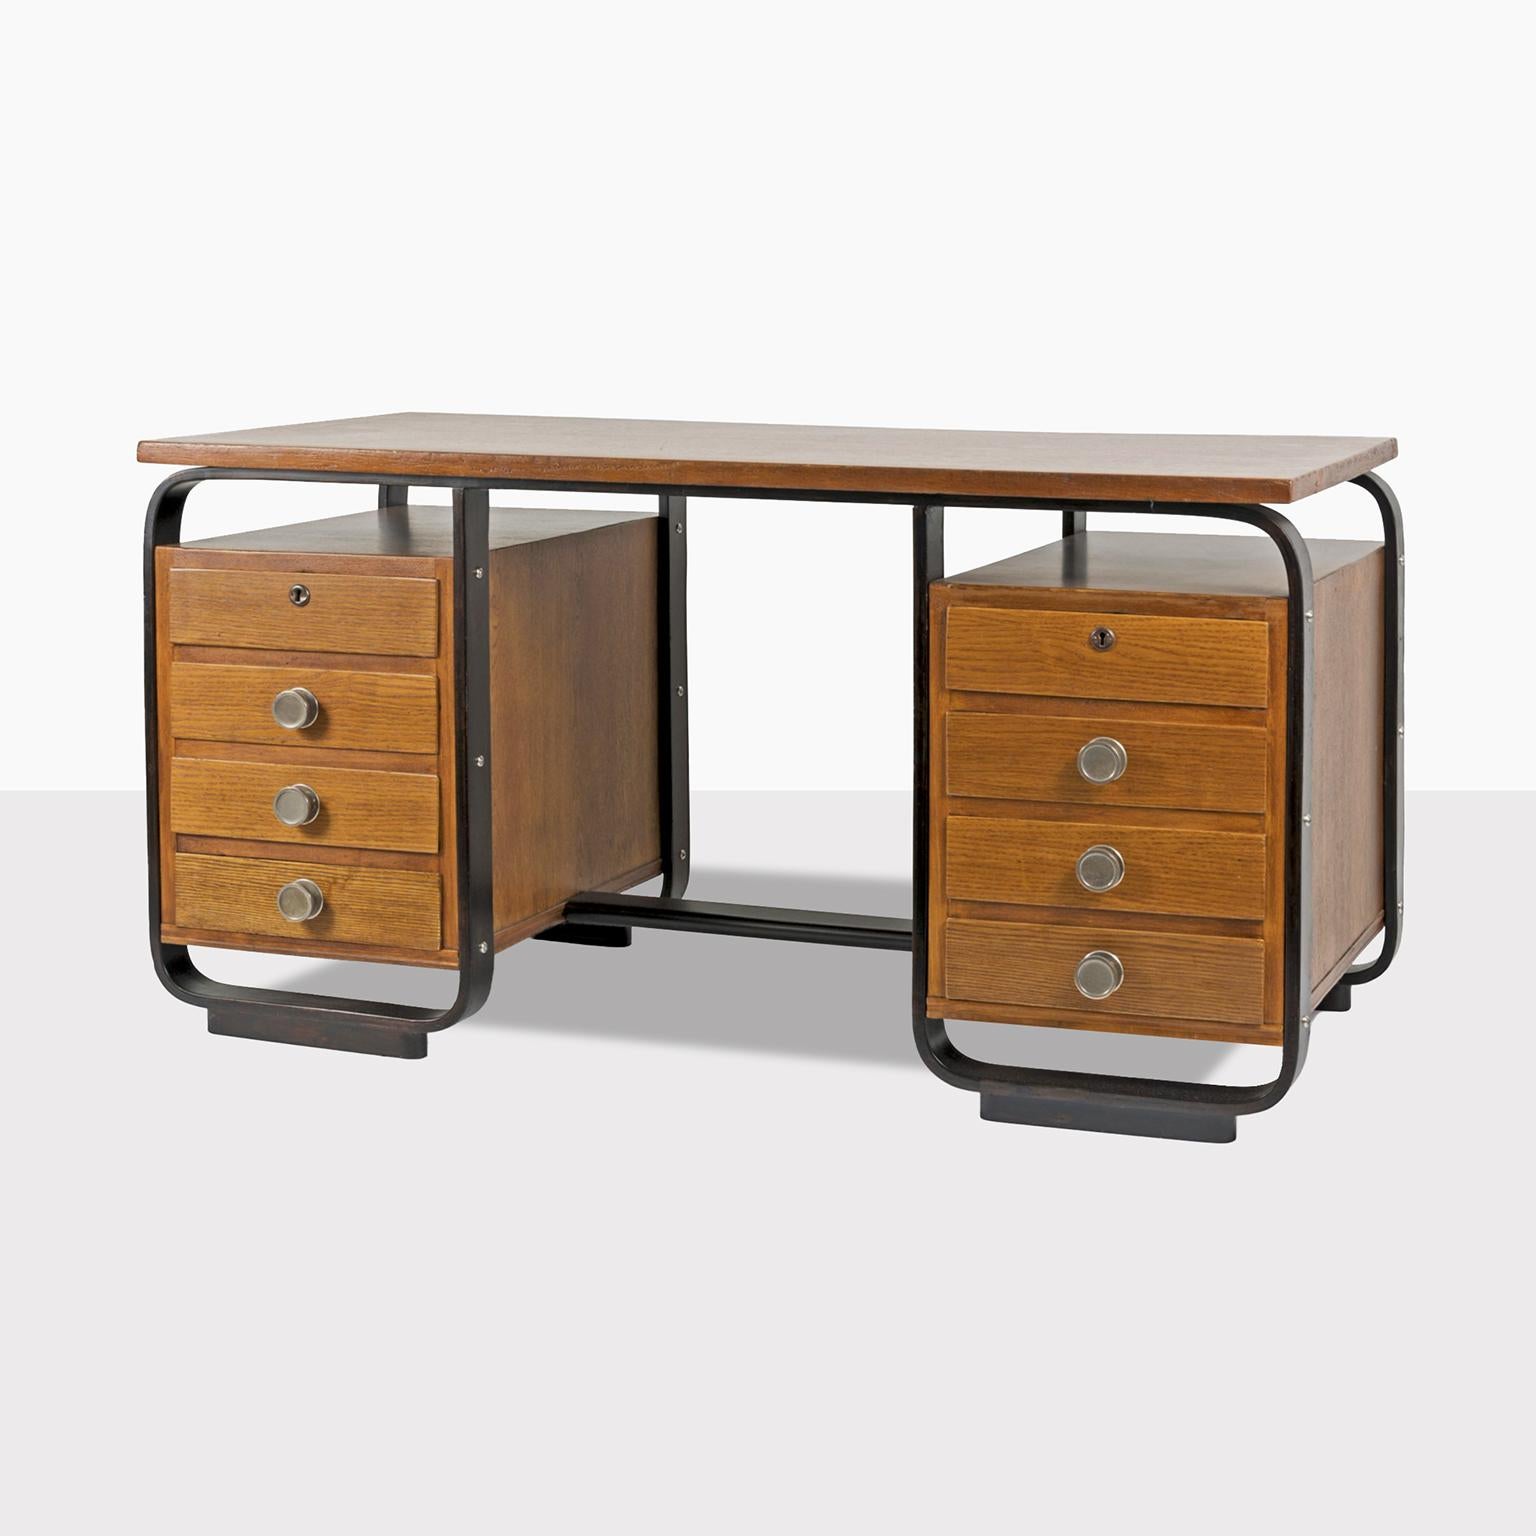 Rationalist wooden desk designed by Giuseppe Pagano Pogatschnig and manufactured by Maggioni, Varedo, circa 1940. The desk was designed for the Bocconi faculty in Milan.